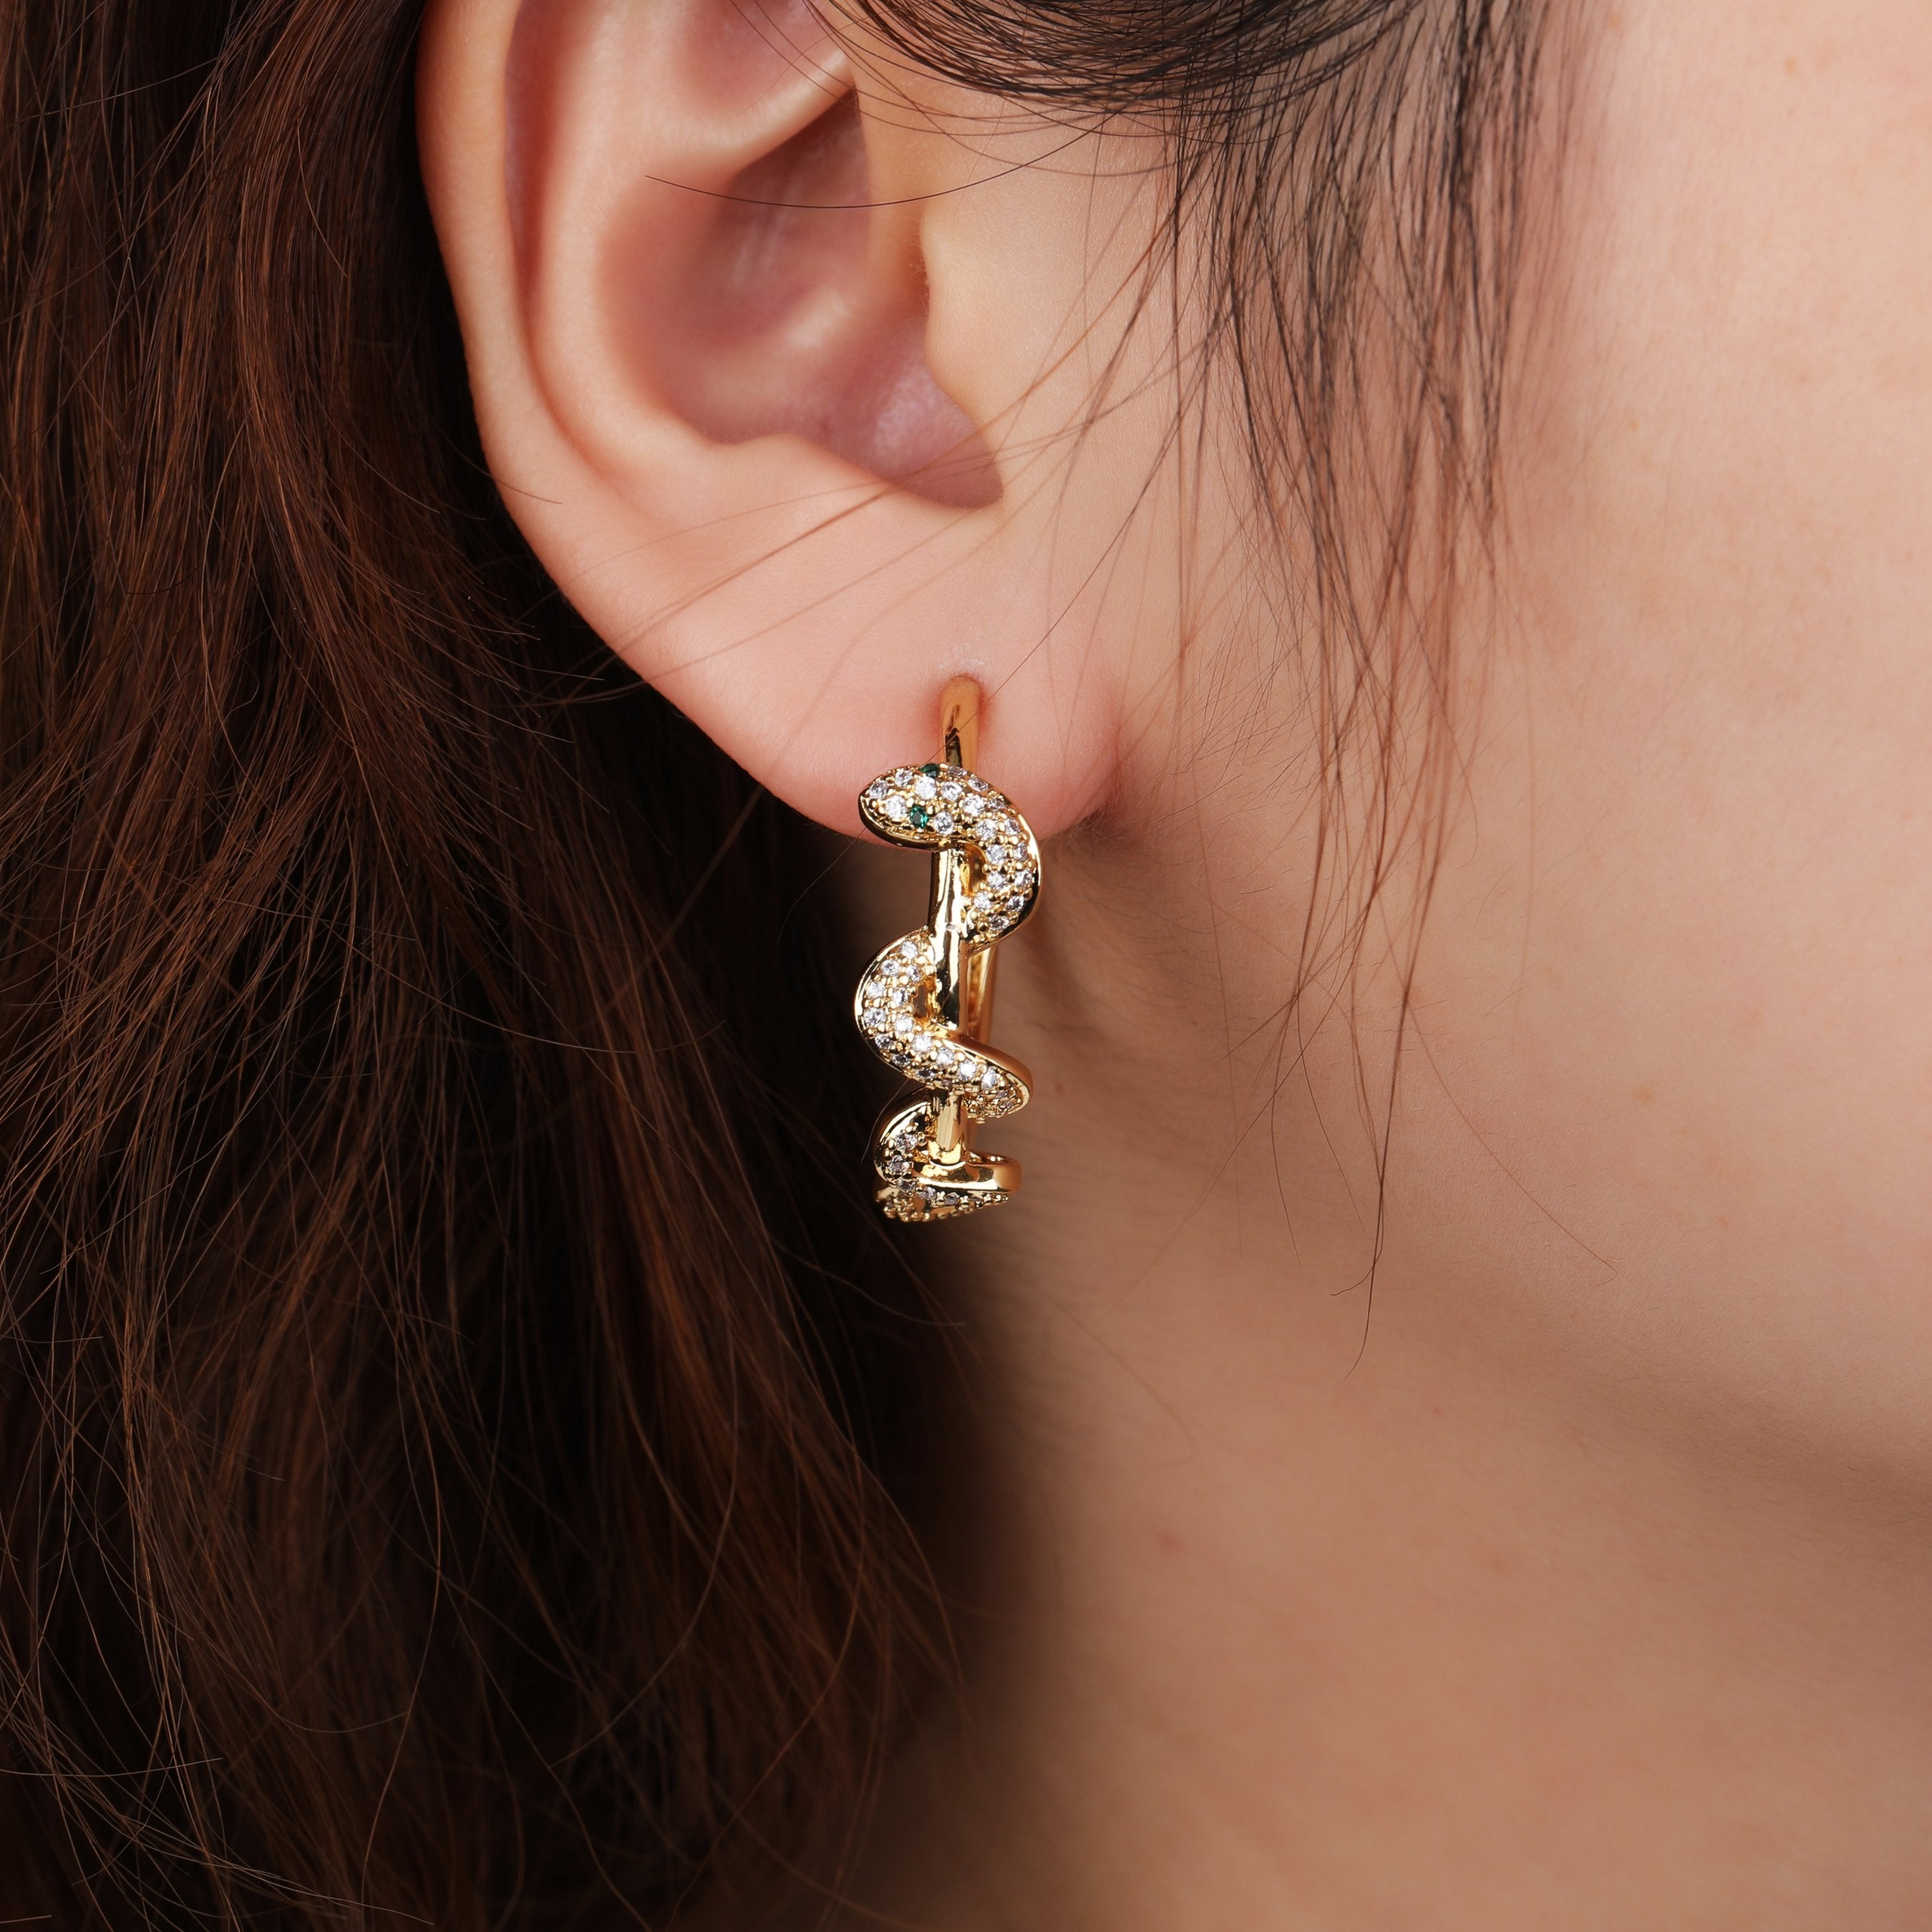 Gold Plated Trendy Snake, Serpent Micro Pave Hoop Earring